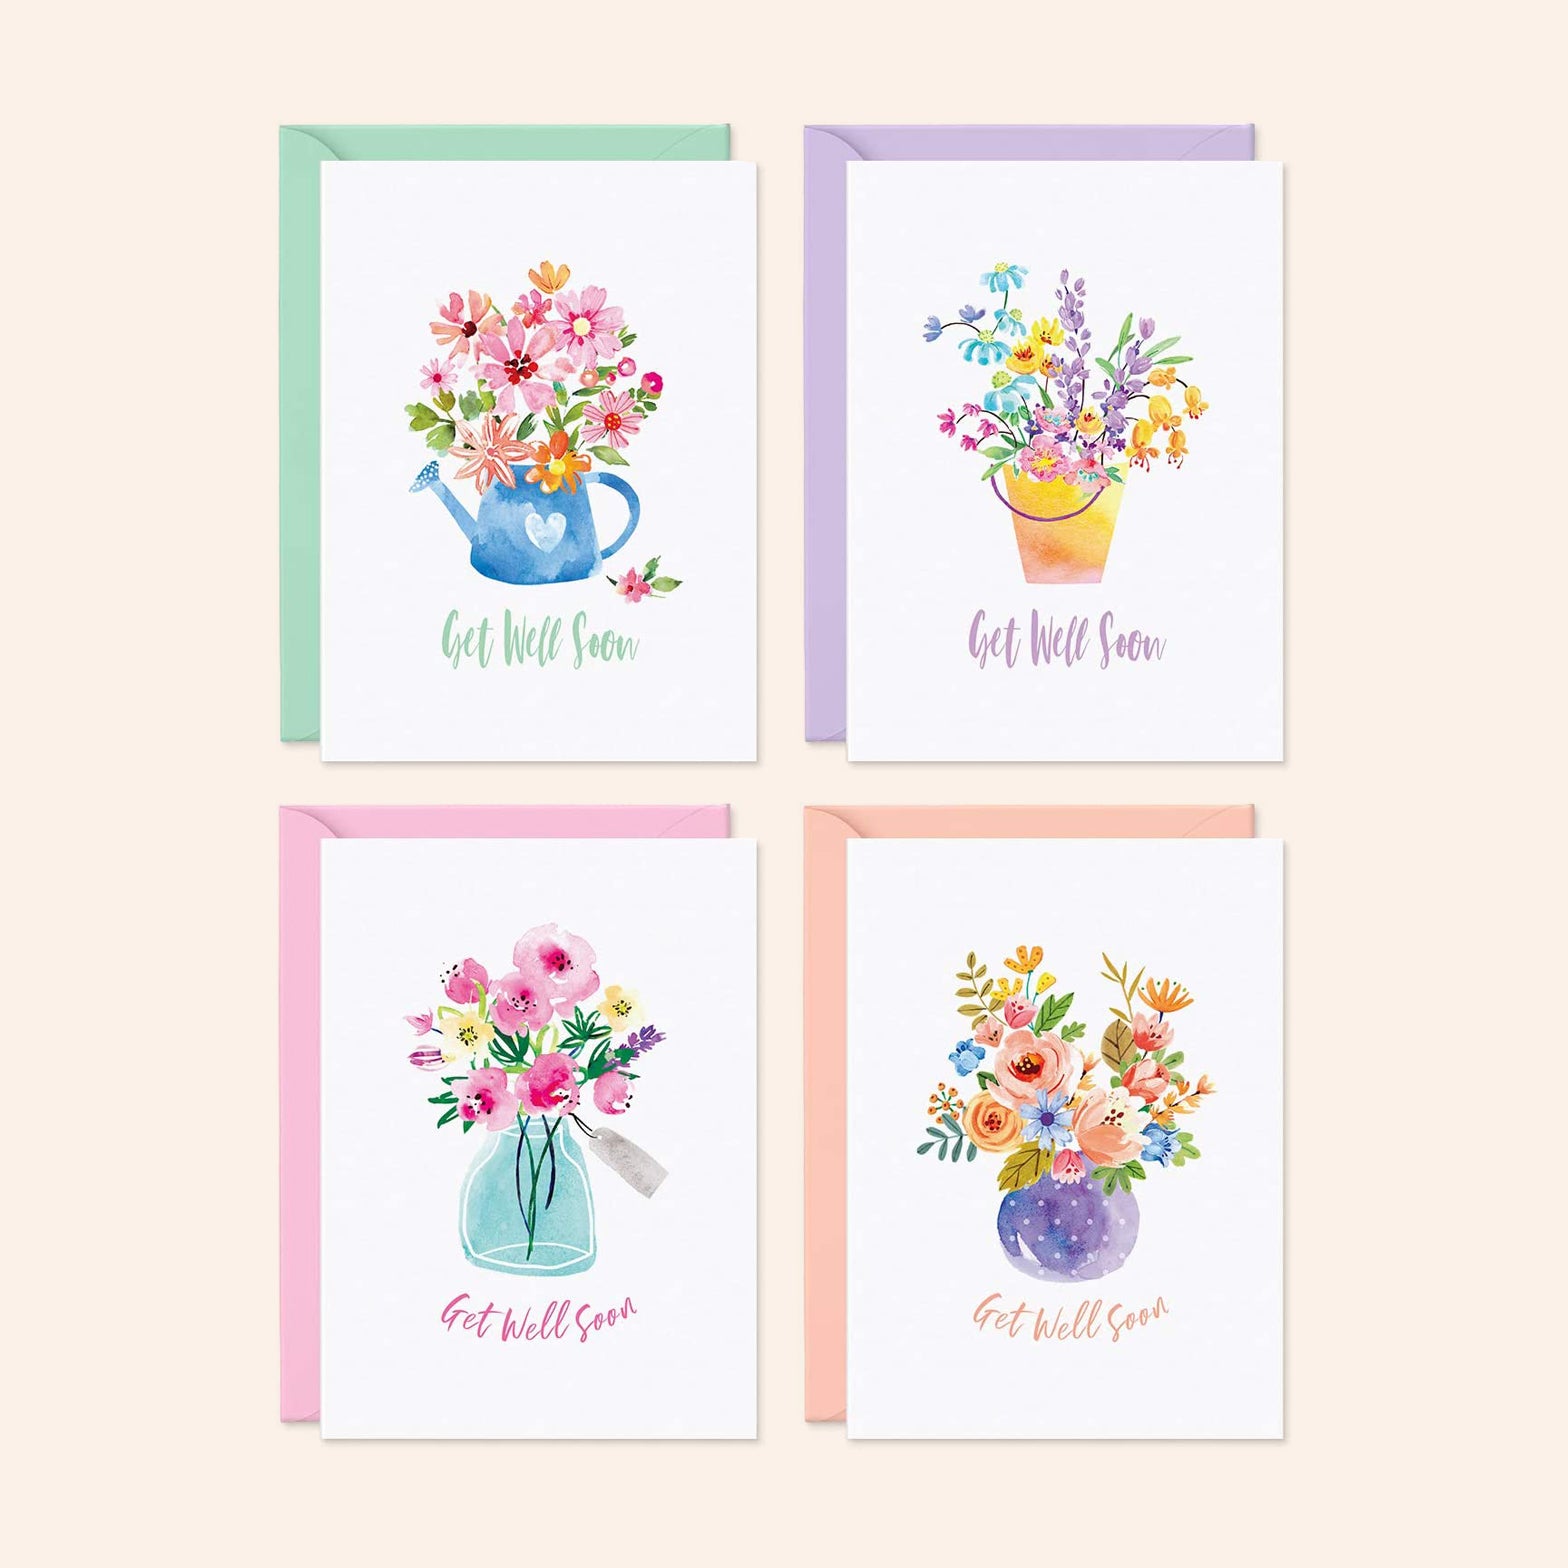 Get Well Soon Cards | Set of 24